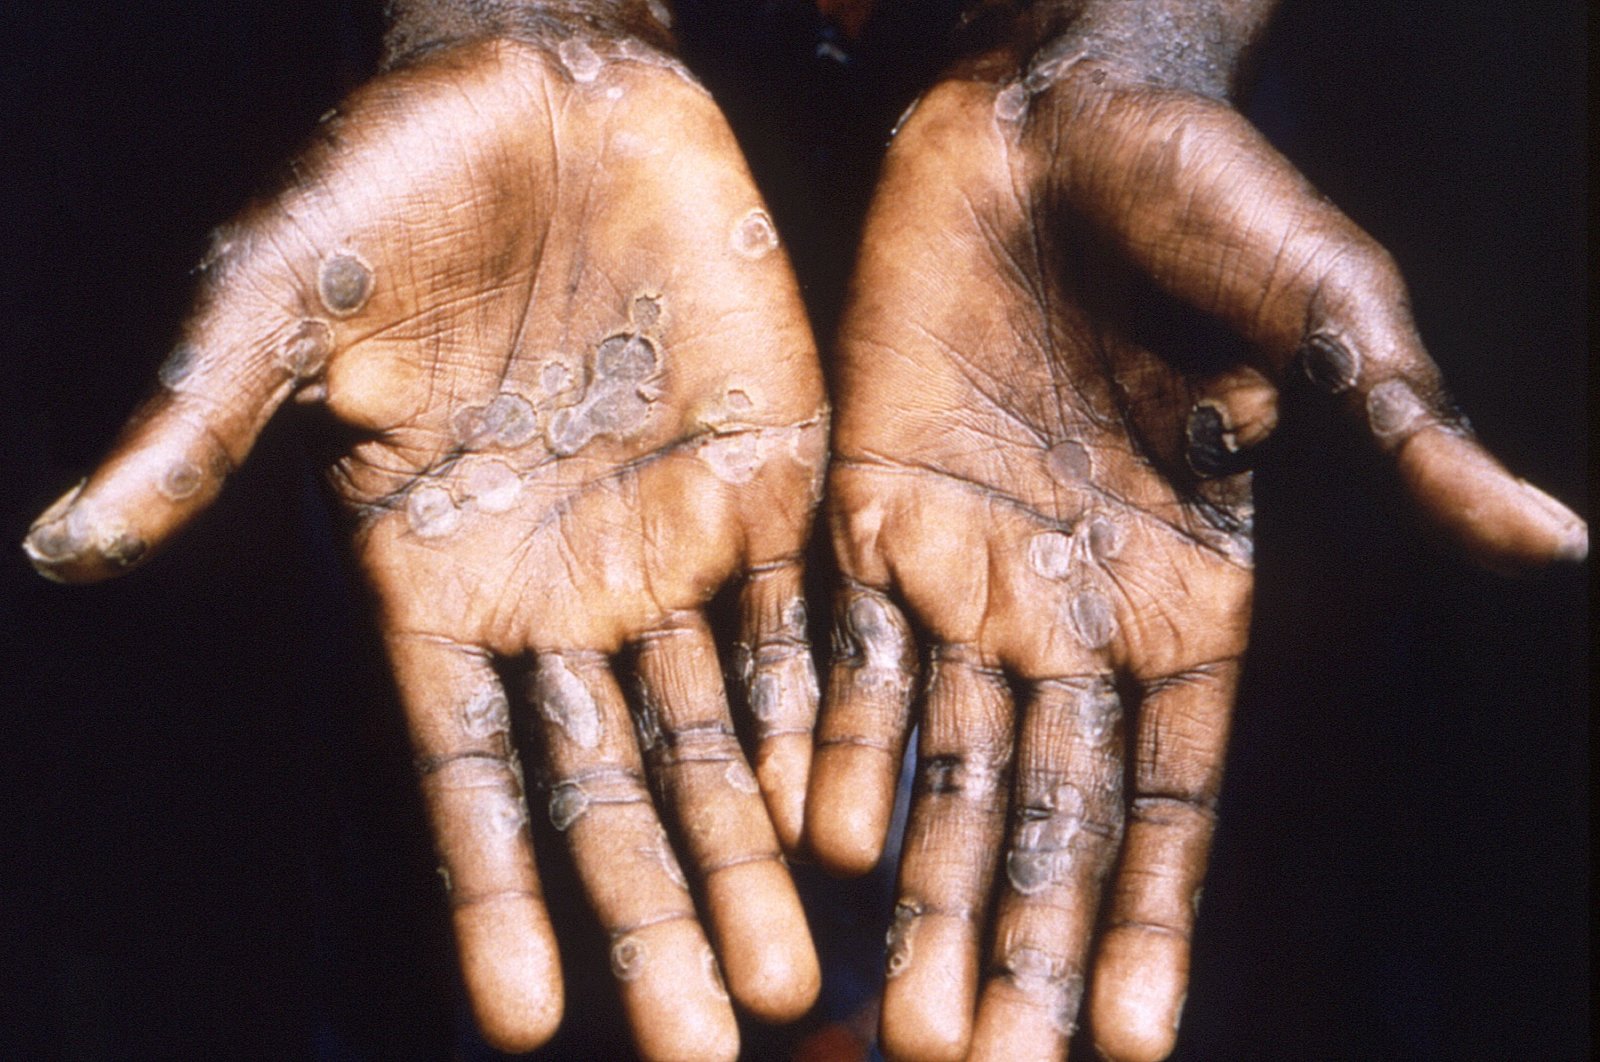 The palms of a monkeypox patient from Lodja, a city located within the Katako-Kombe Health Zone, are seen during a health investigation in the Democratic Republic of Congo in 1997. (Brian W.J. Mahy/CDC/Handout via REUTERS)